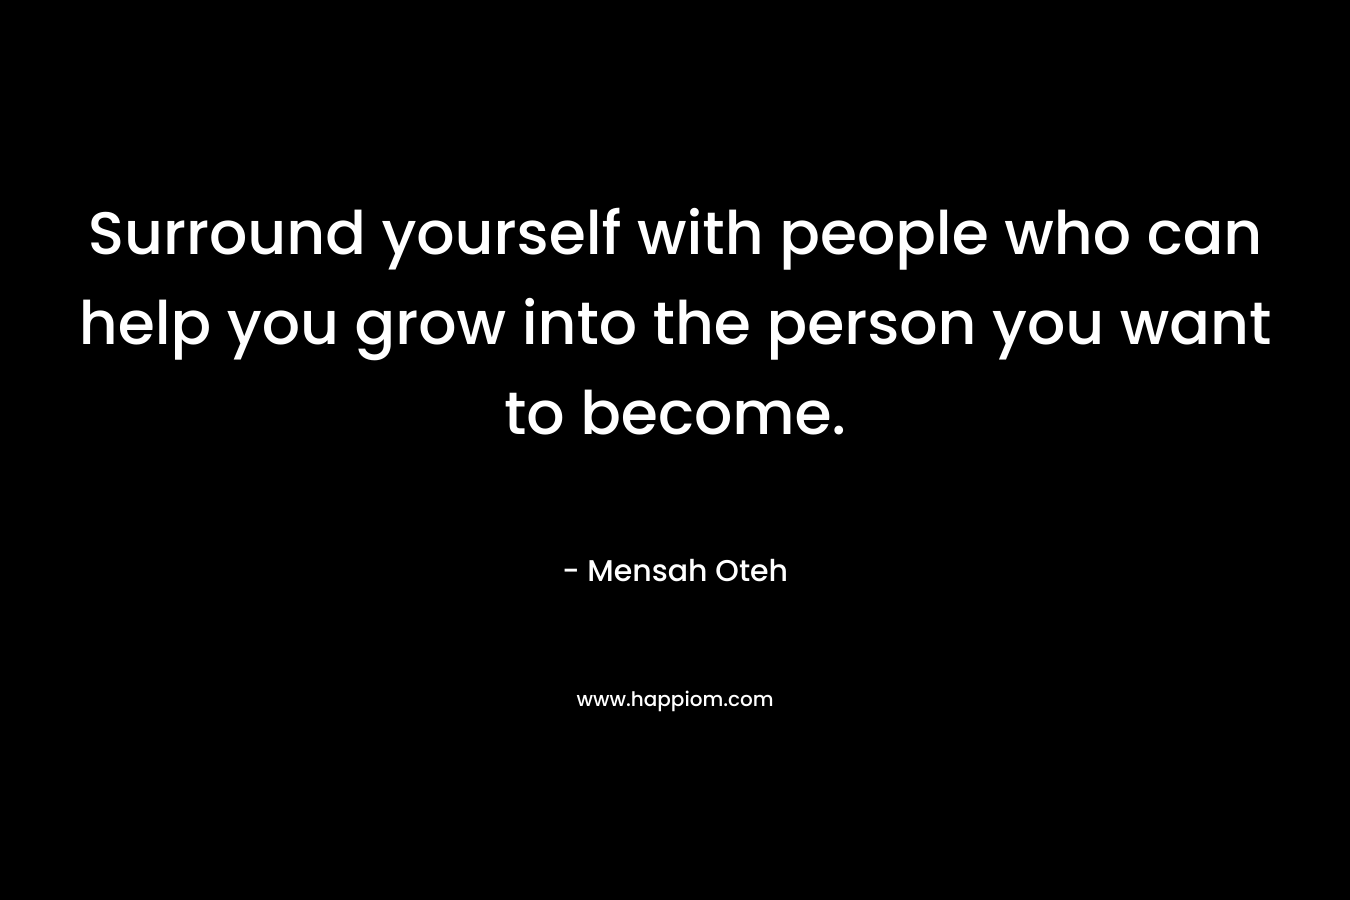 Surround yourself with people who can help you grow into the person you want to become. – Mensah Oteh